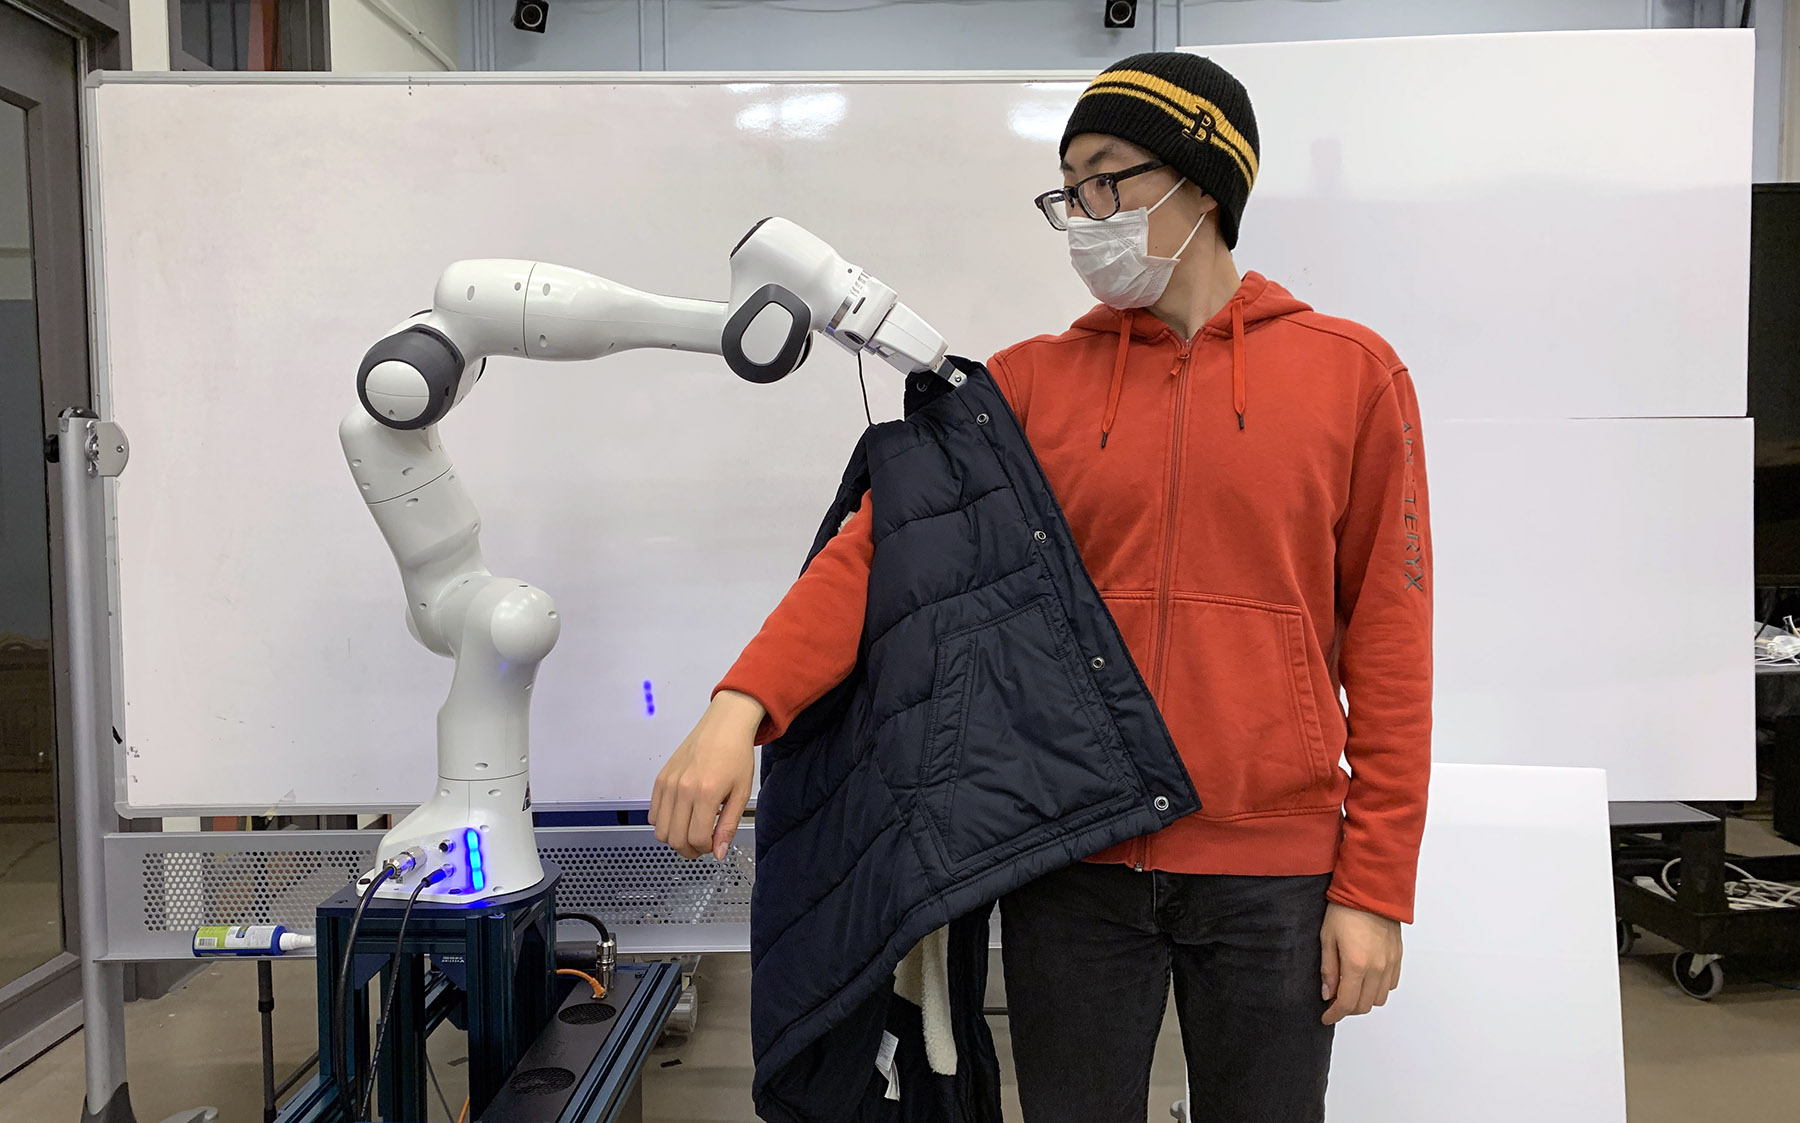 Robots That Can Dress People